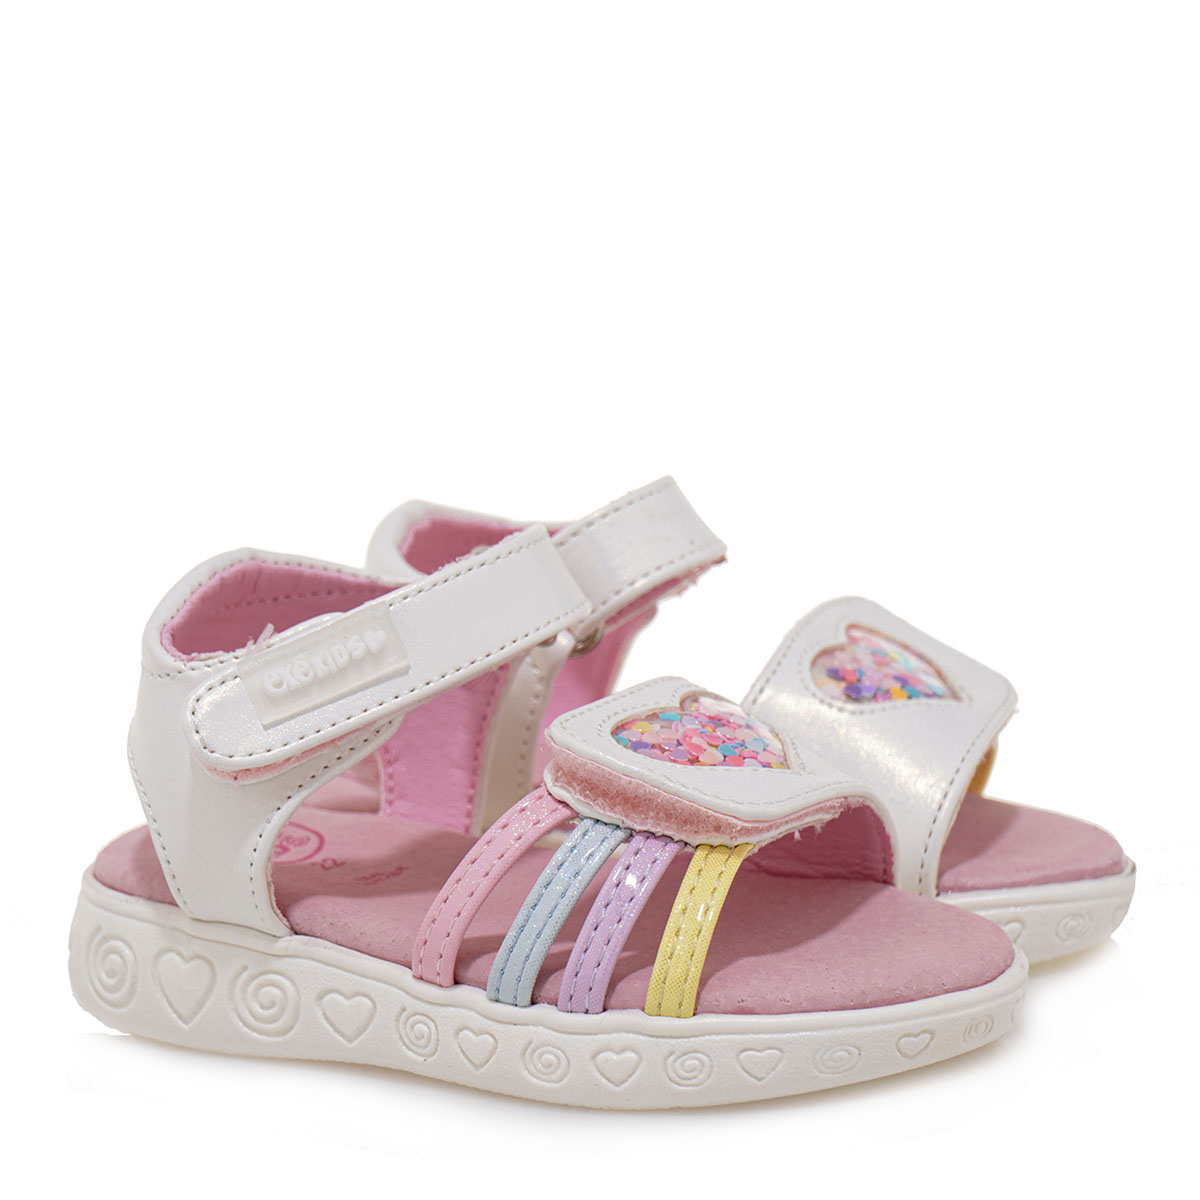 EXE KIDS SHOES - 2